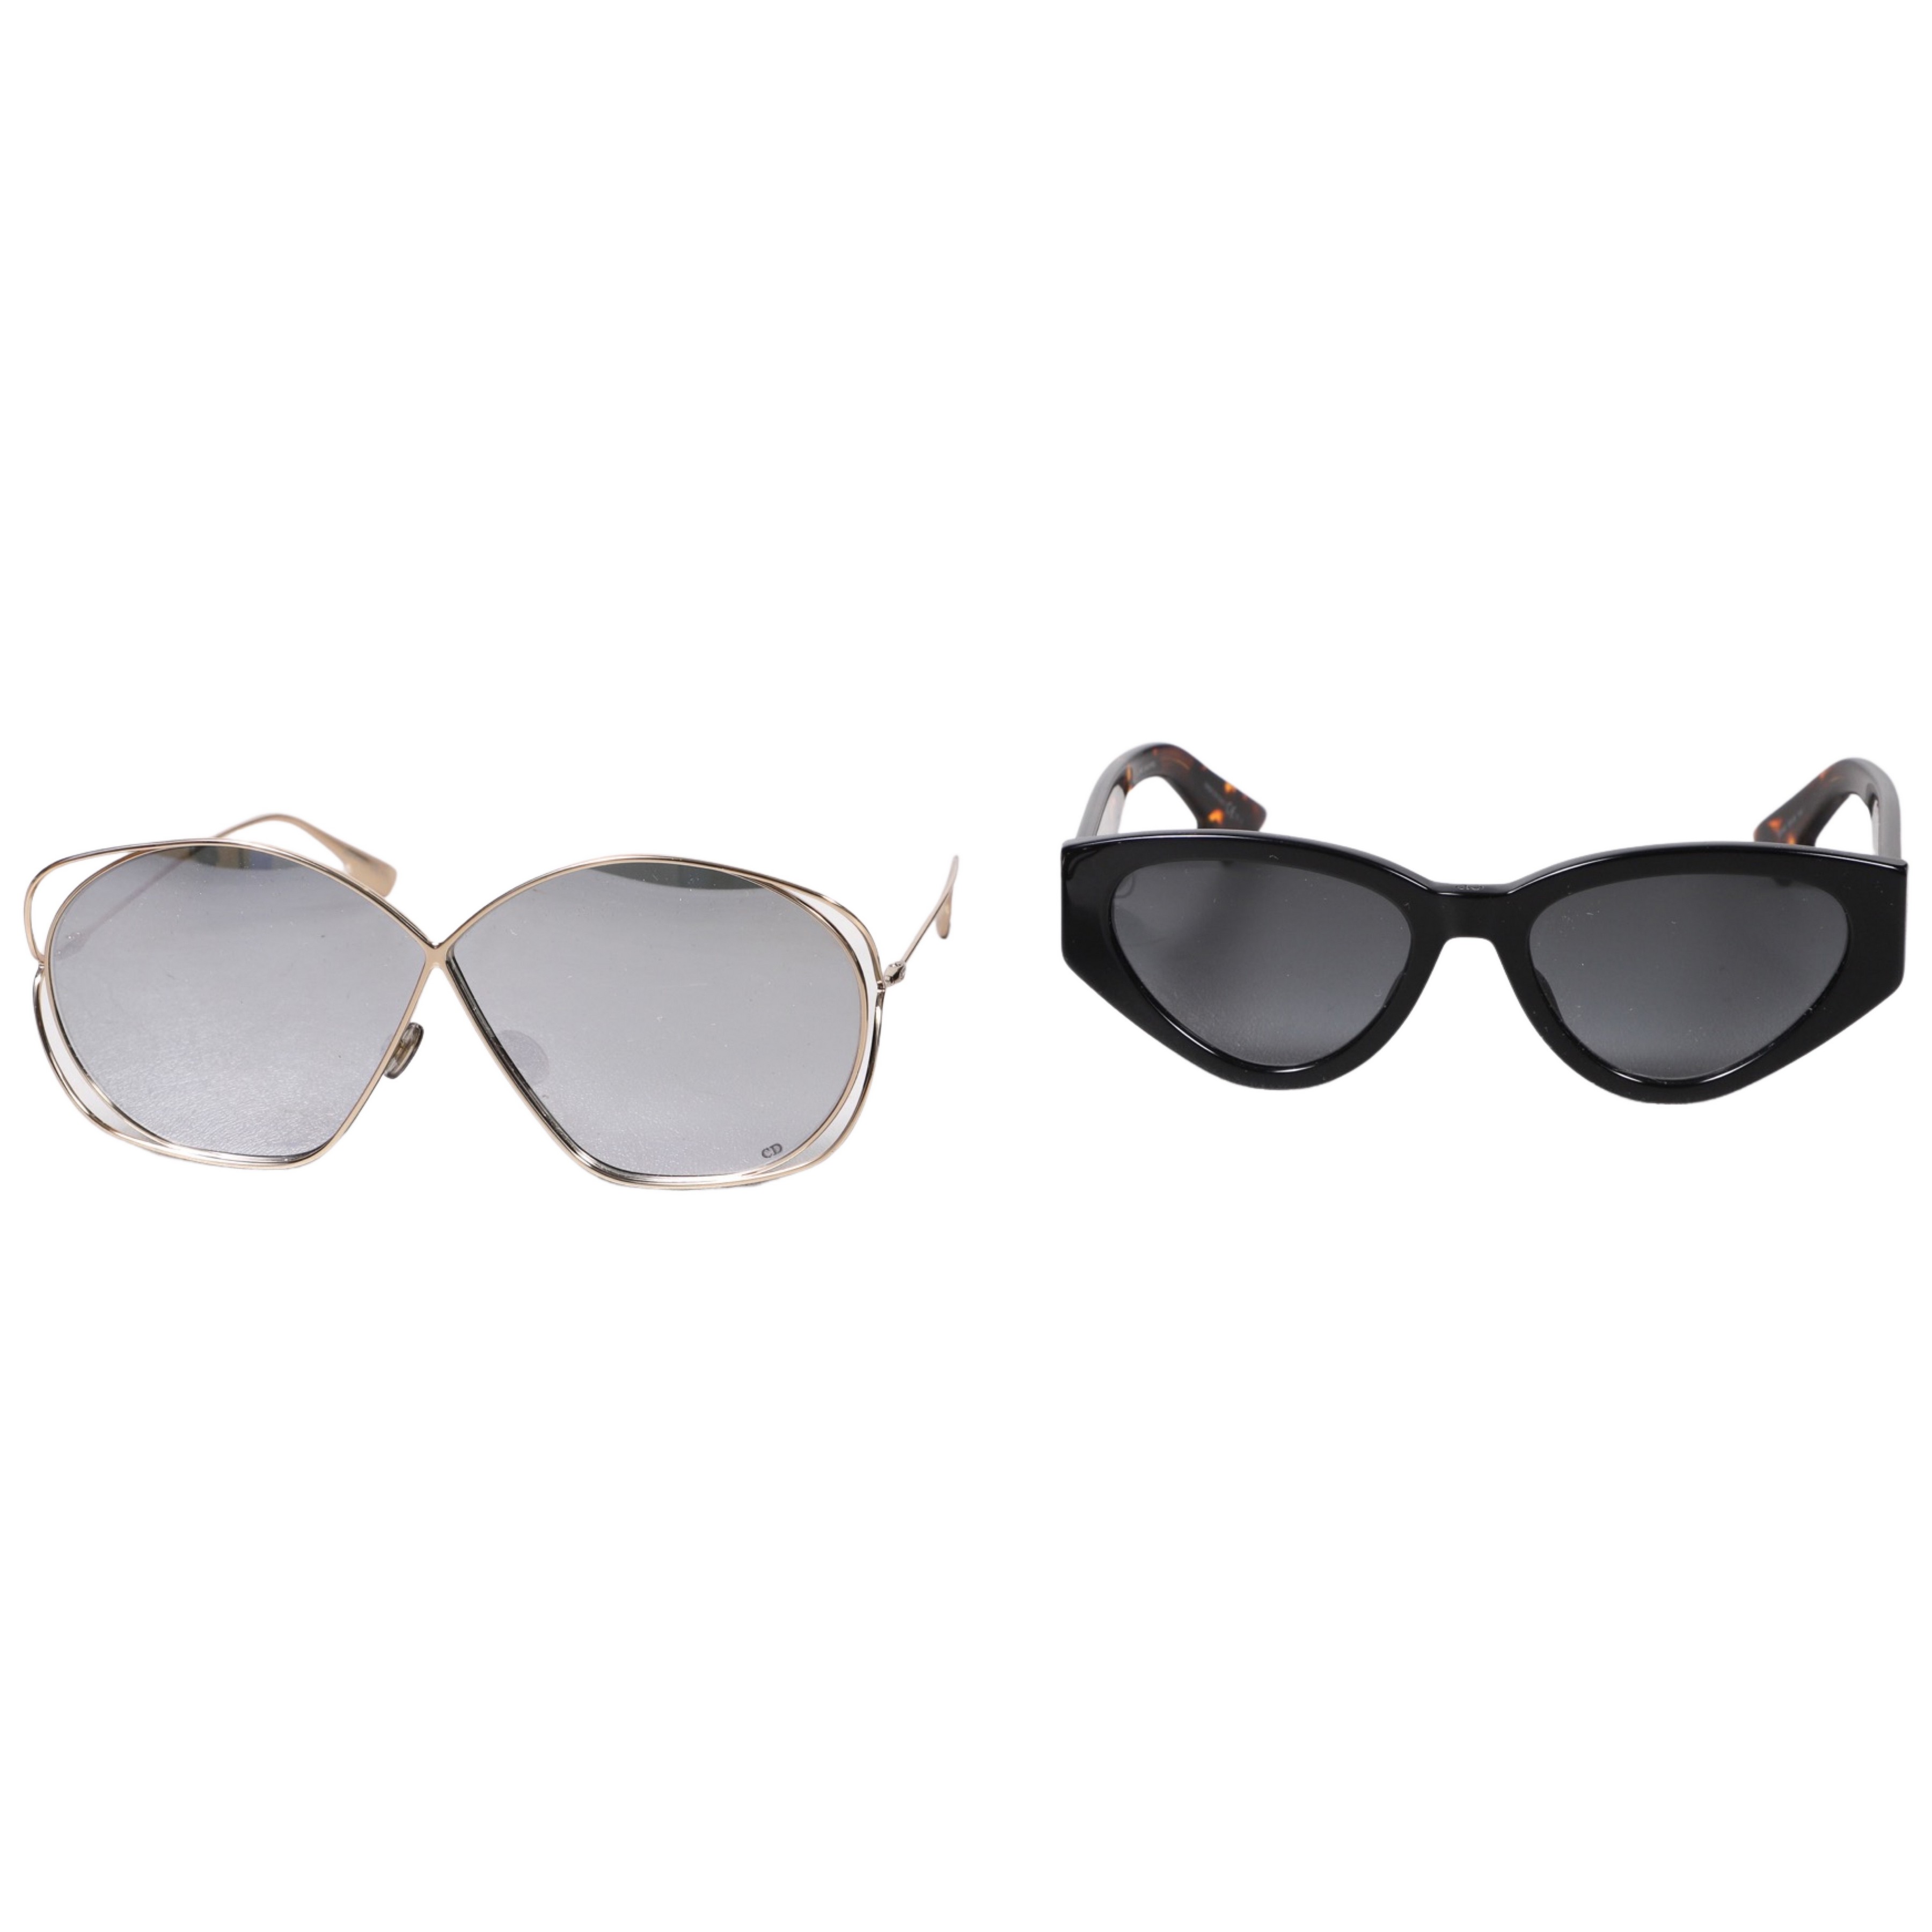  2 Pairs Dior sunglasses to include 27a665